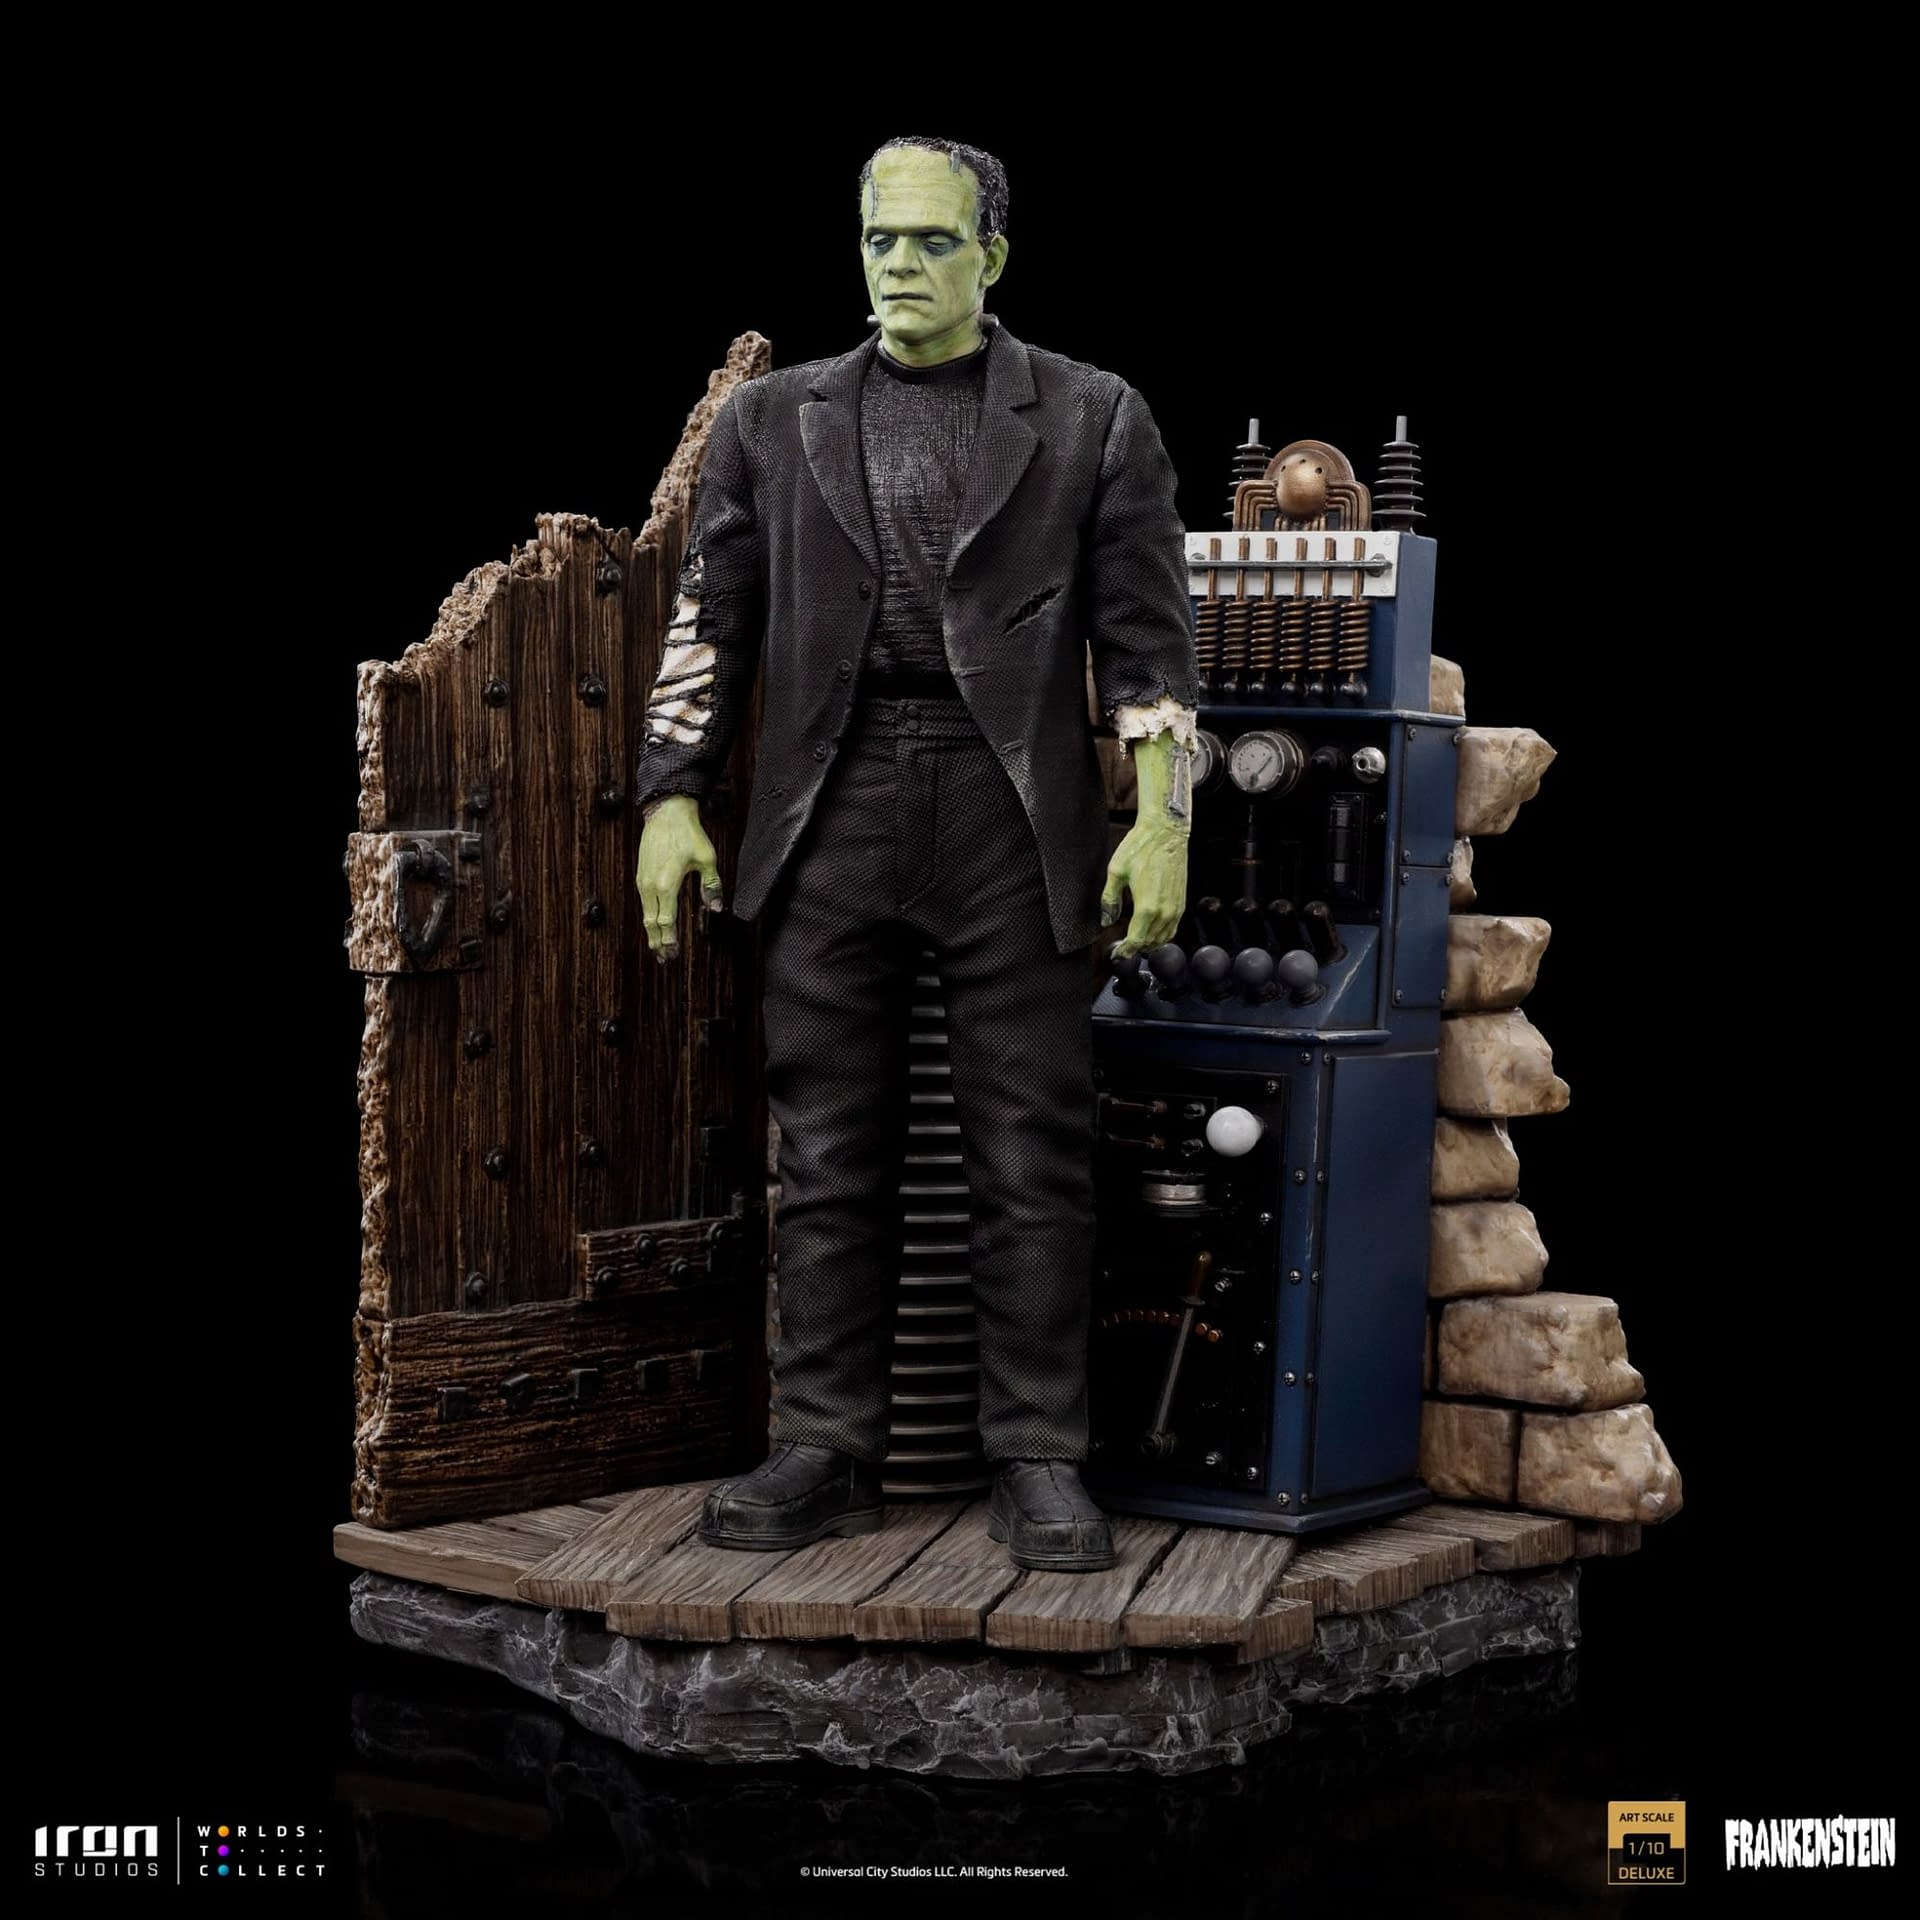 Universal Monsters Frankenstein is Alive Once More with Iron Studios 